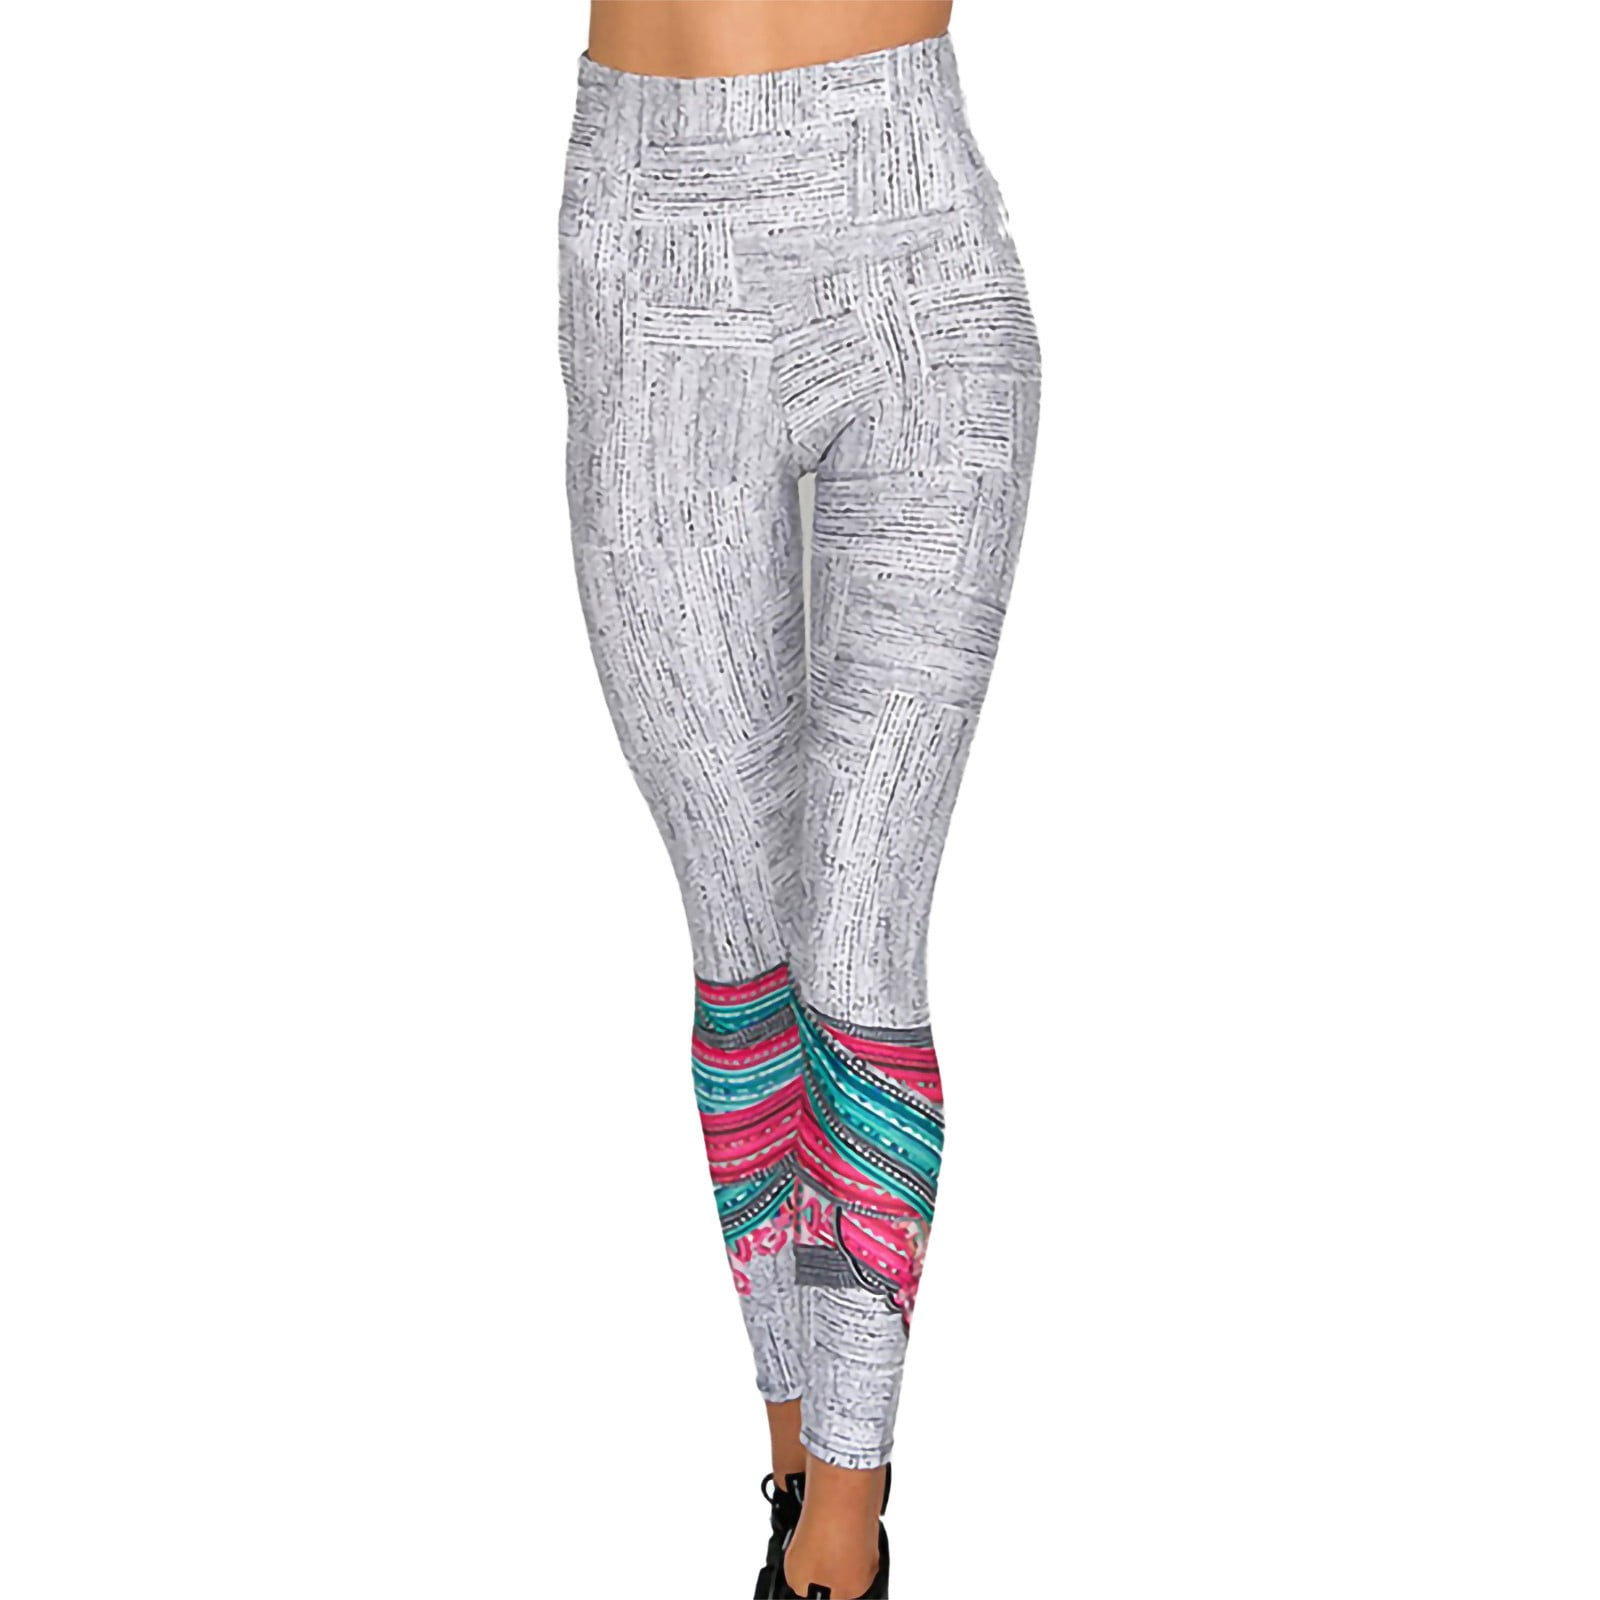 Details about   Womens Fitness Gym Leggings Sweatpants Sports Bottom Print Yoga Workout Trousers 